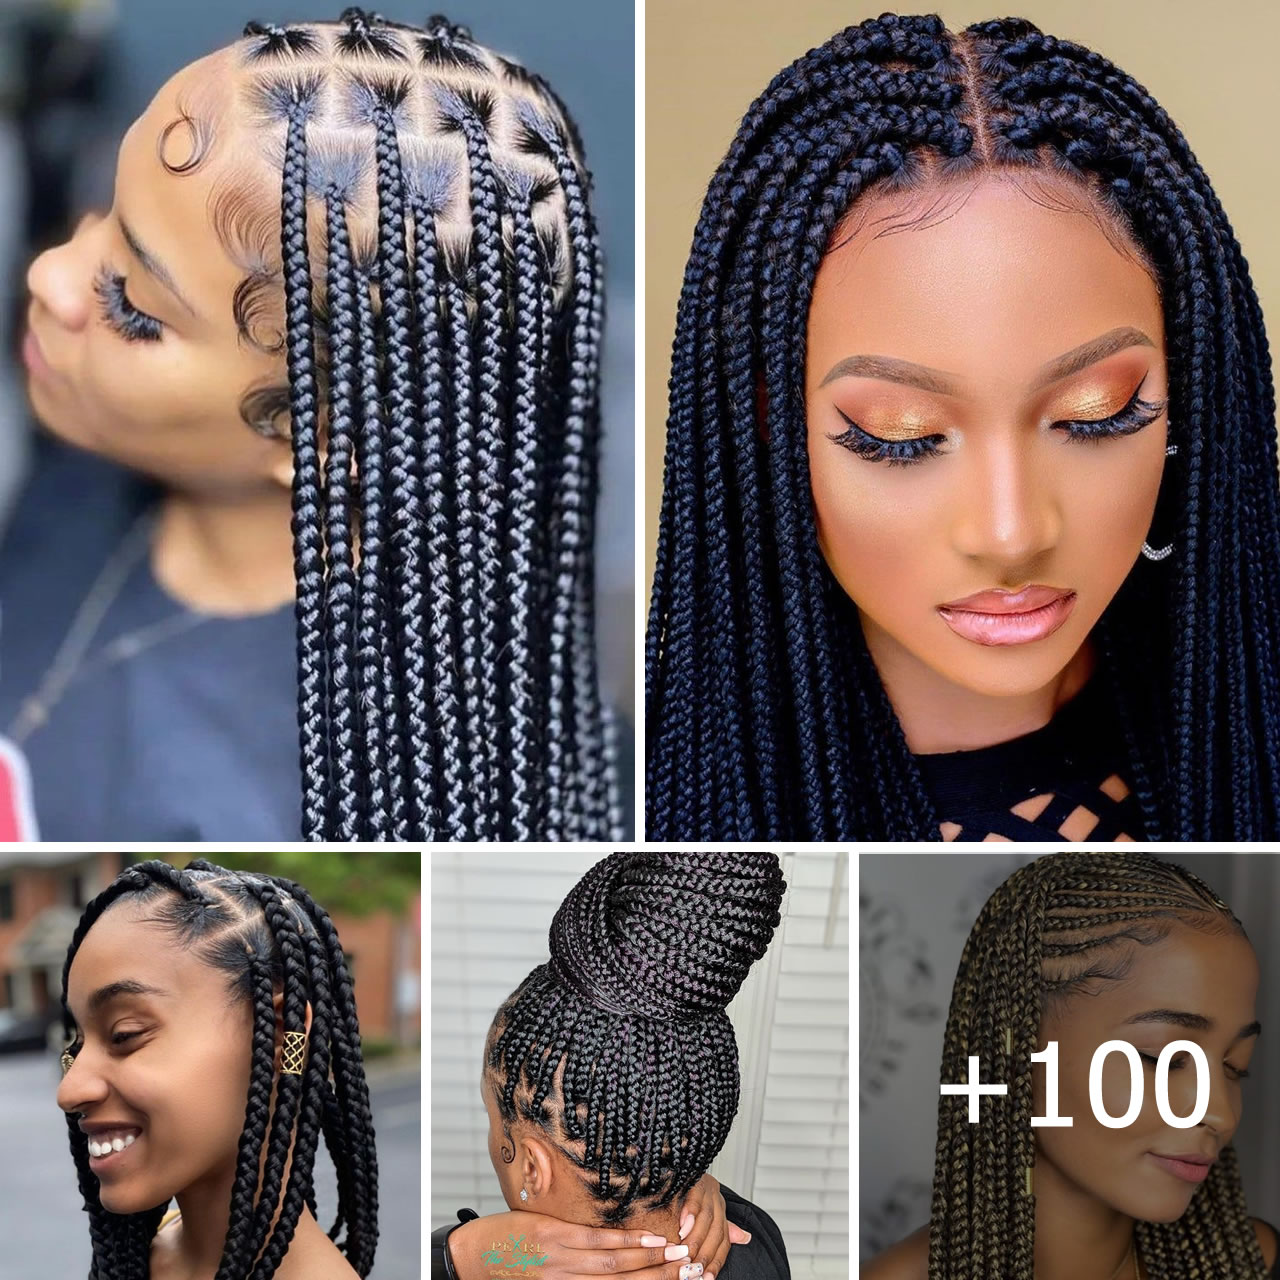 100+ Medium Box Braids Styles To Try For Your Next Look